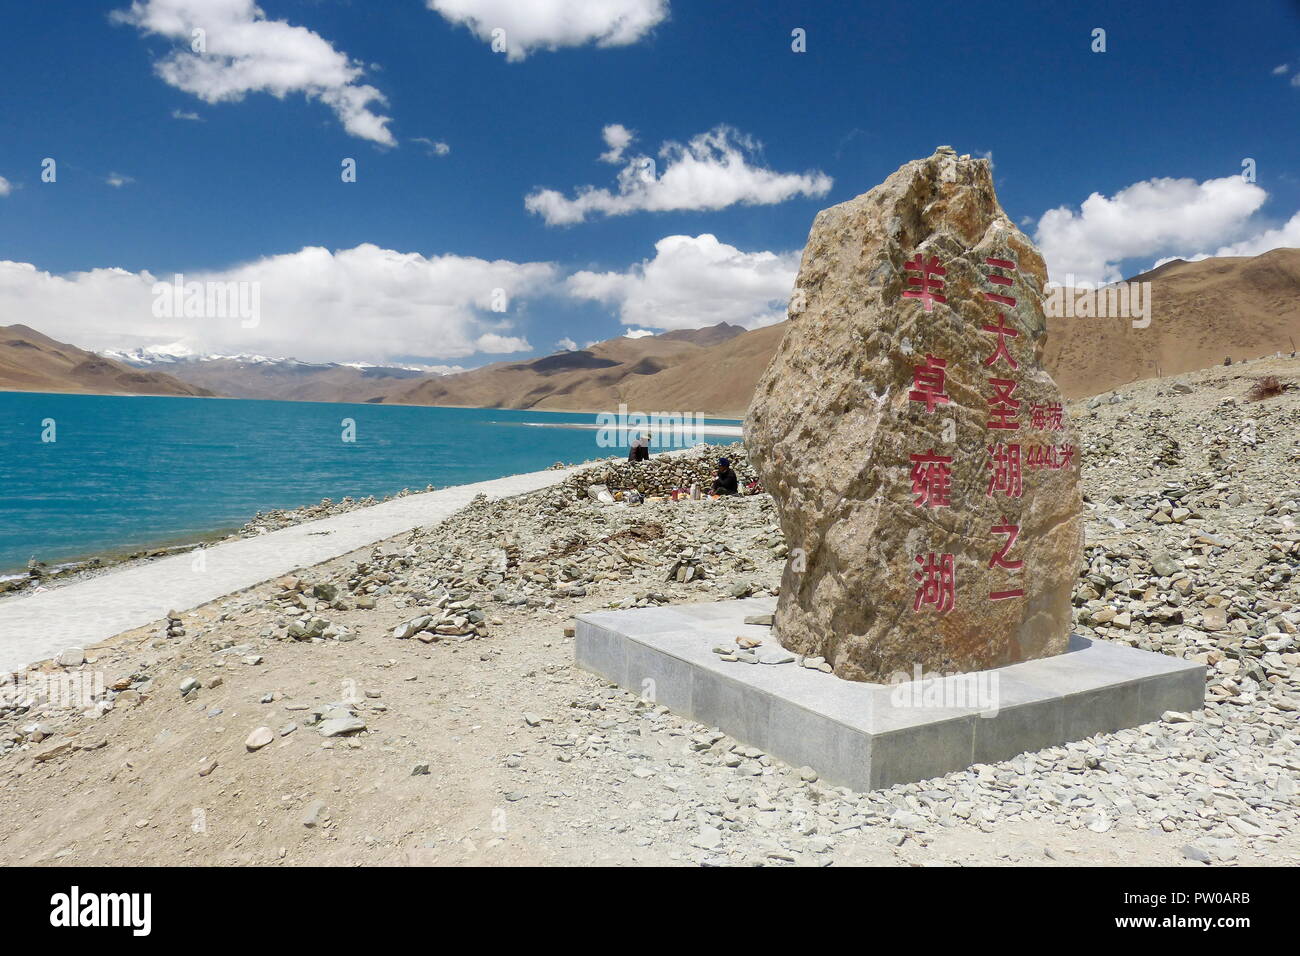 A rock signage in Mandarin characters for Yamdrok Lake, one of the three largest sacred lake in Tibet Autonomous Region. Stock Photo